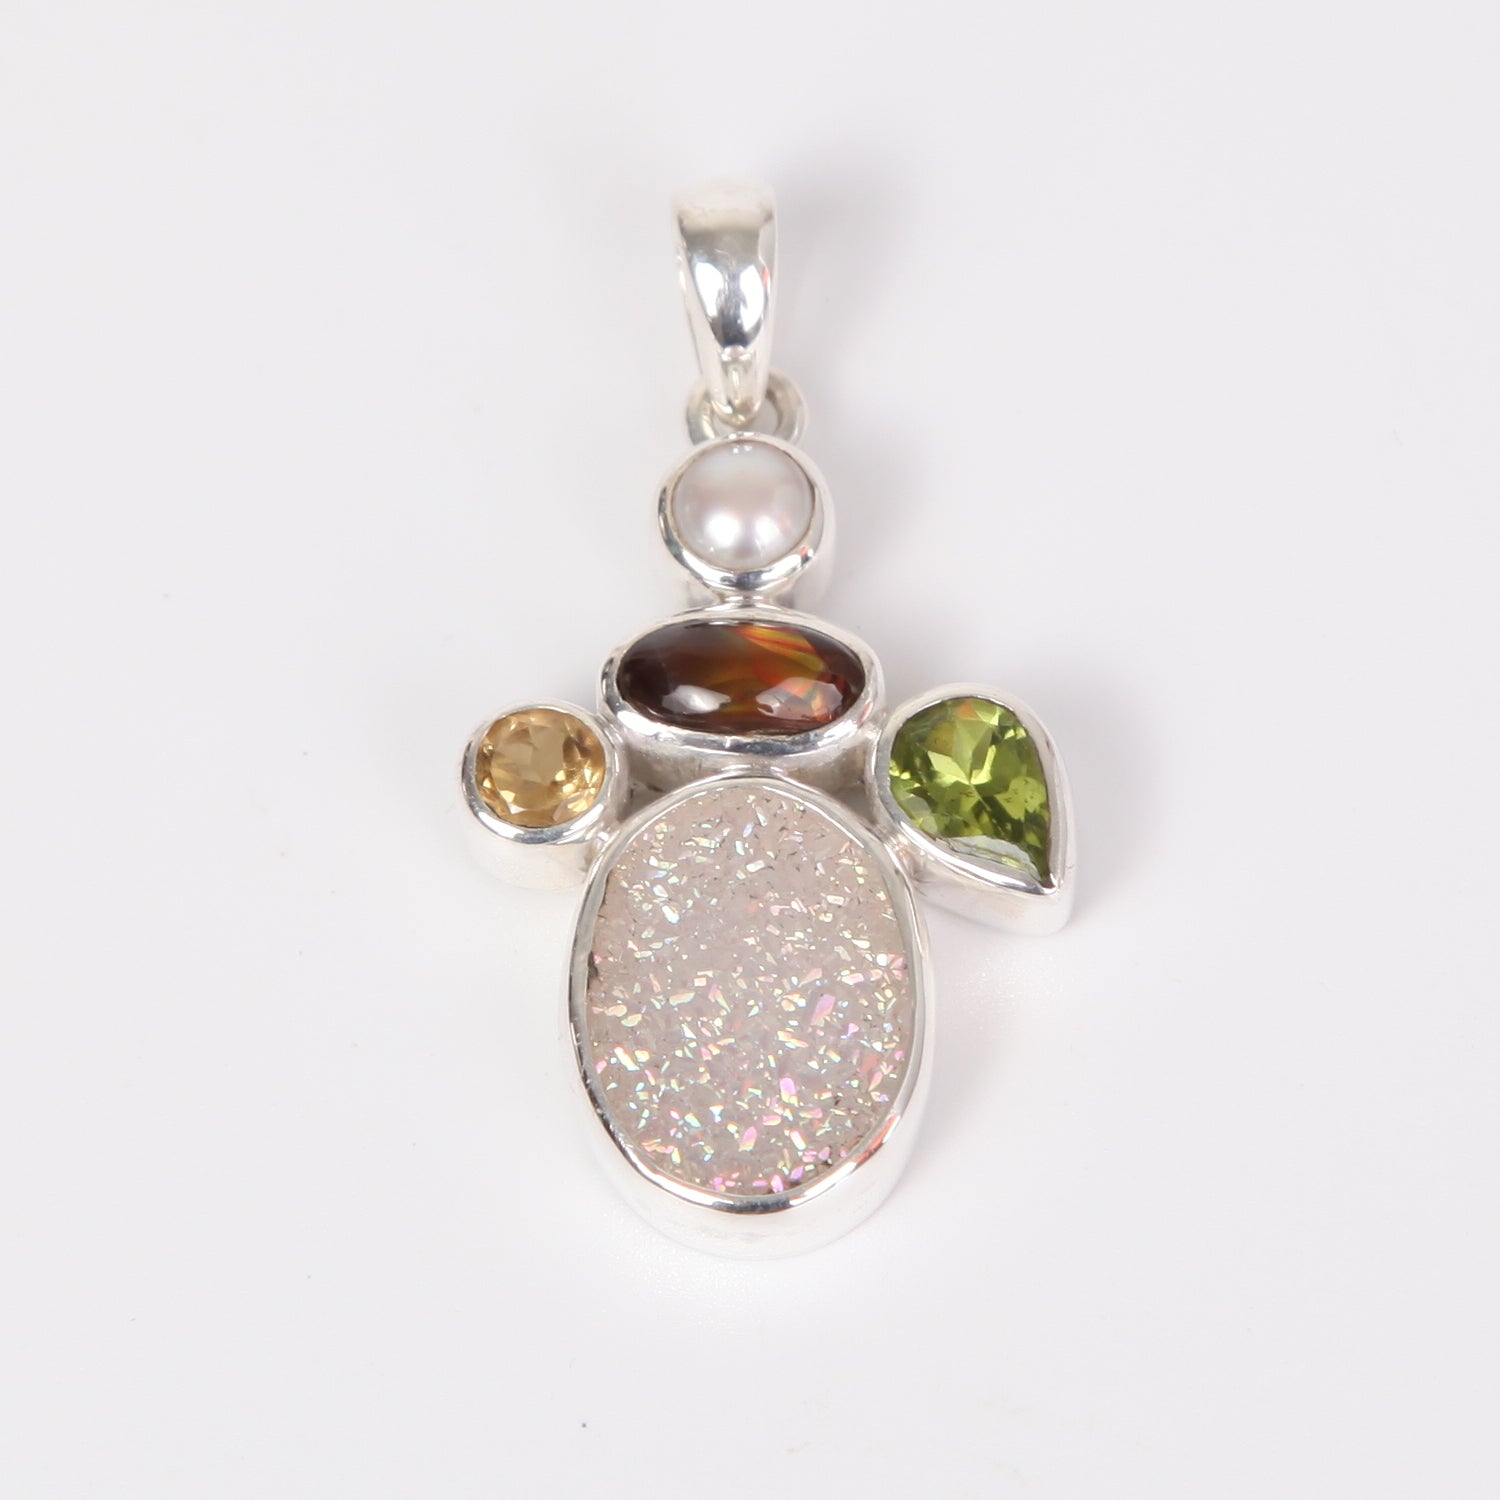 Drusy Quartz Sterling Silver Pendant with Fire Agate, Peridot, Citrine and Fresh Water Pearl